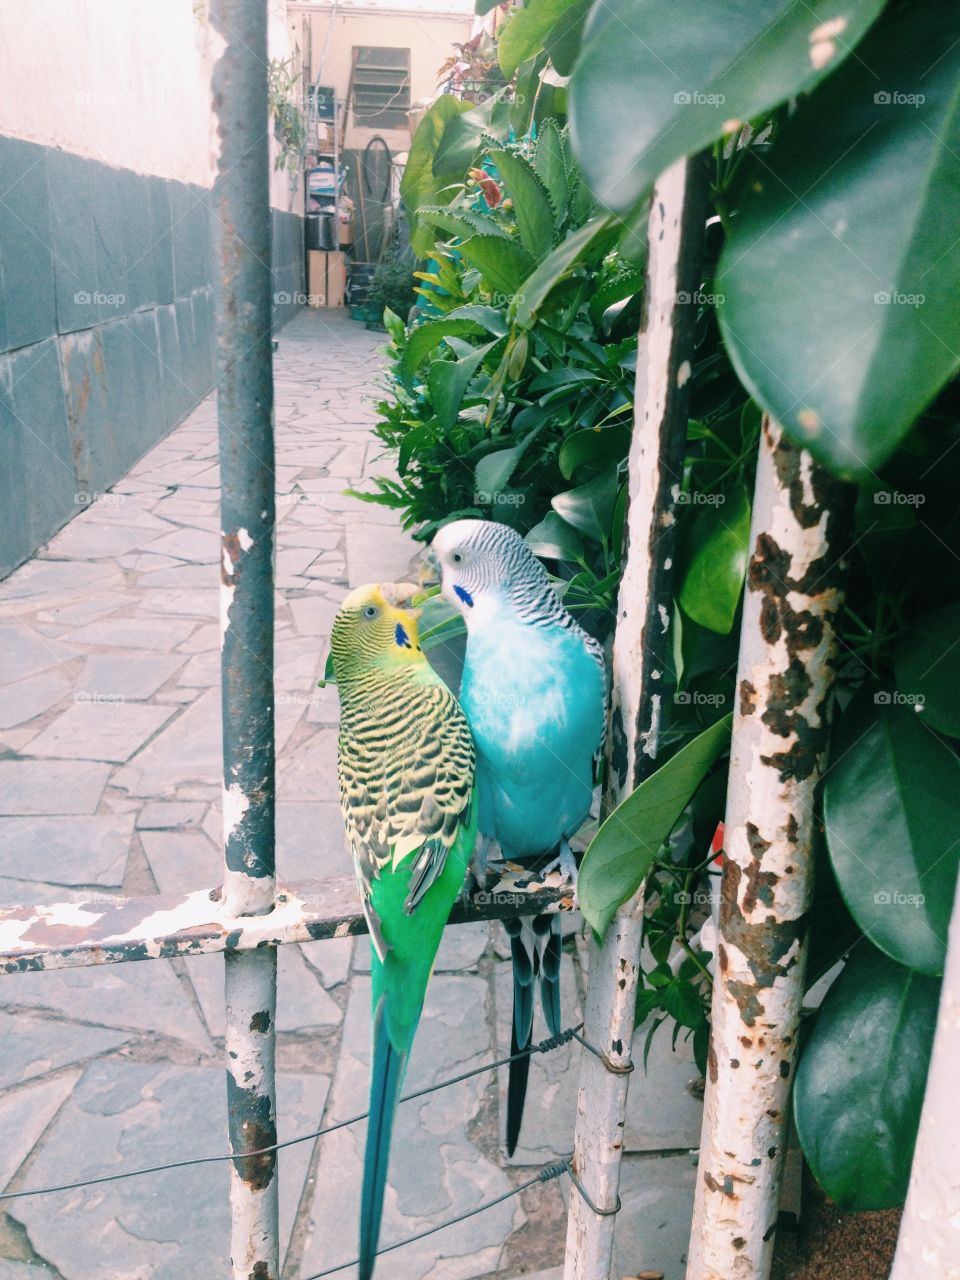 The love in birds is amasing 